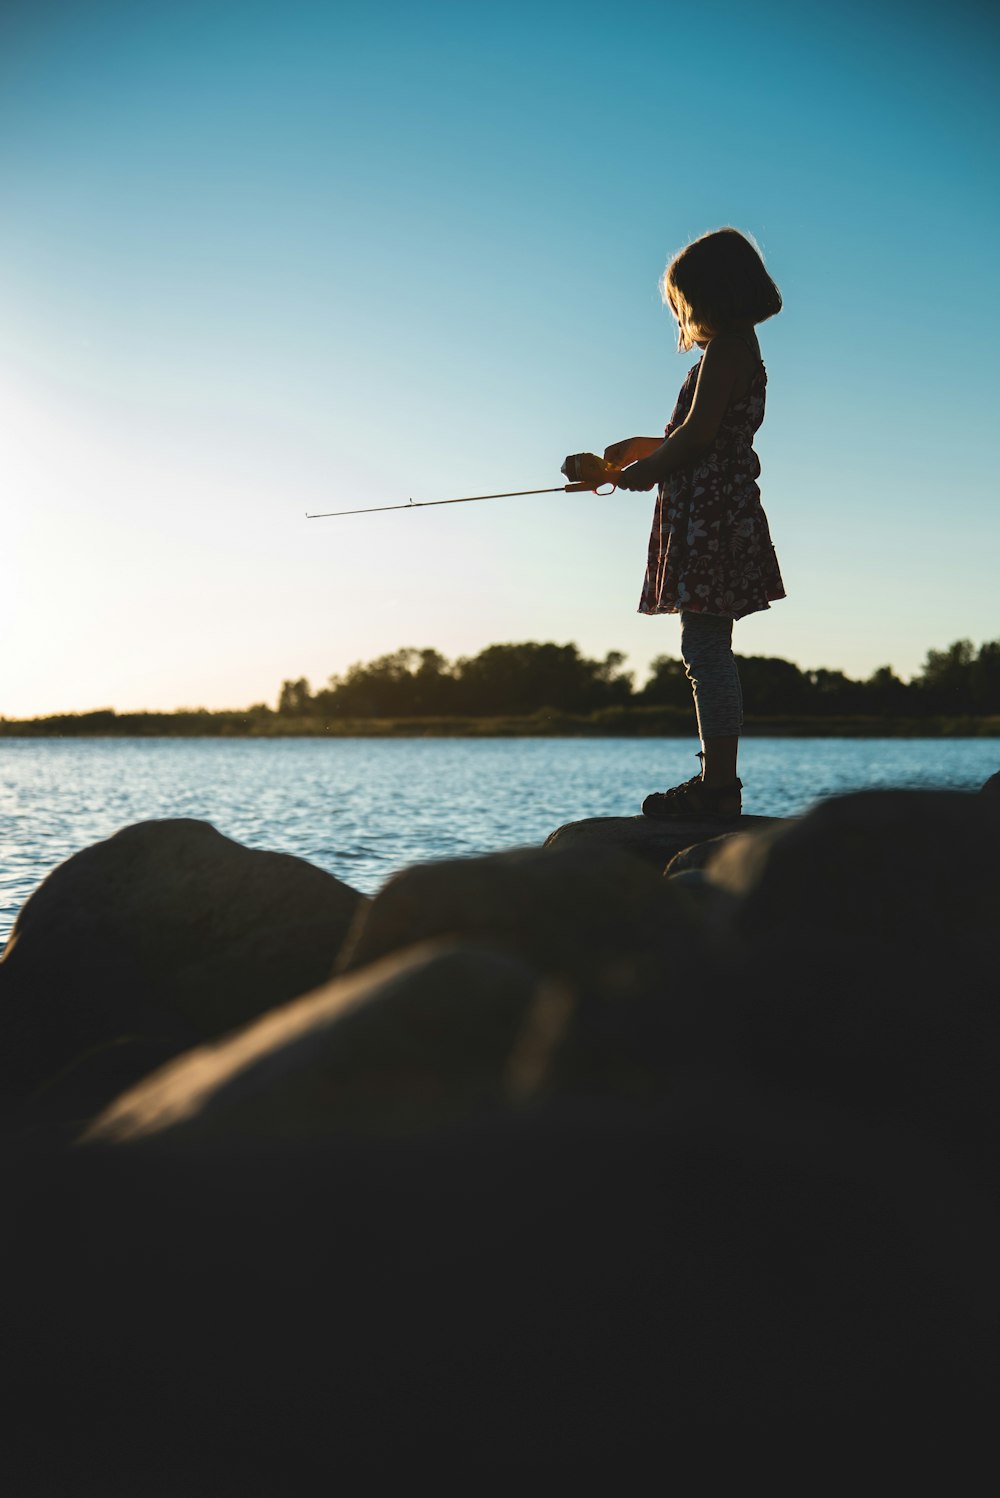 woman in white and black dress holding fishing rod standing on rock near body of water